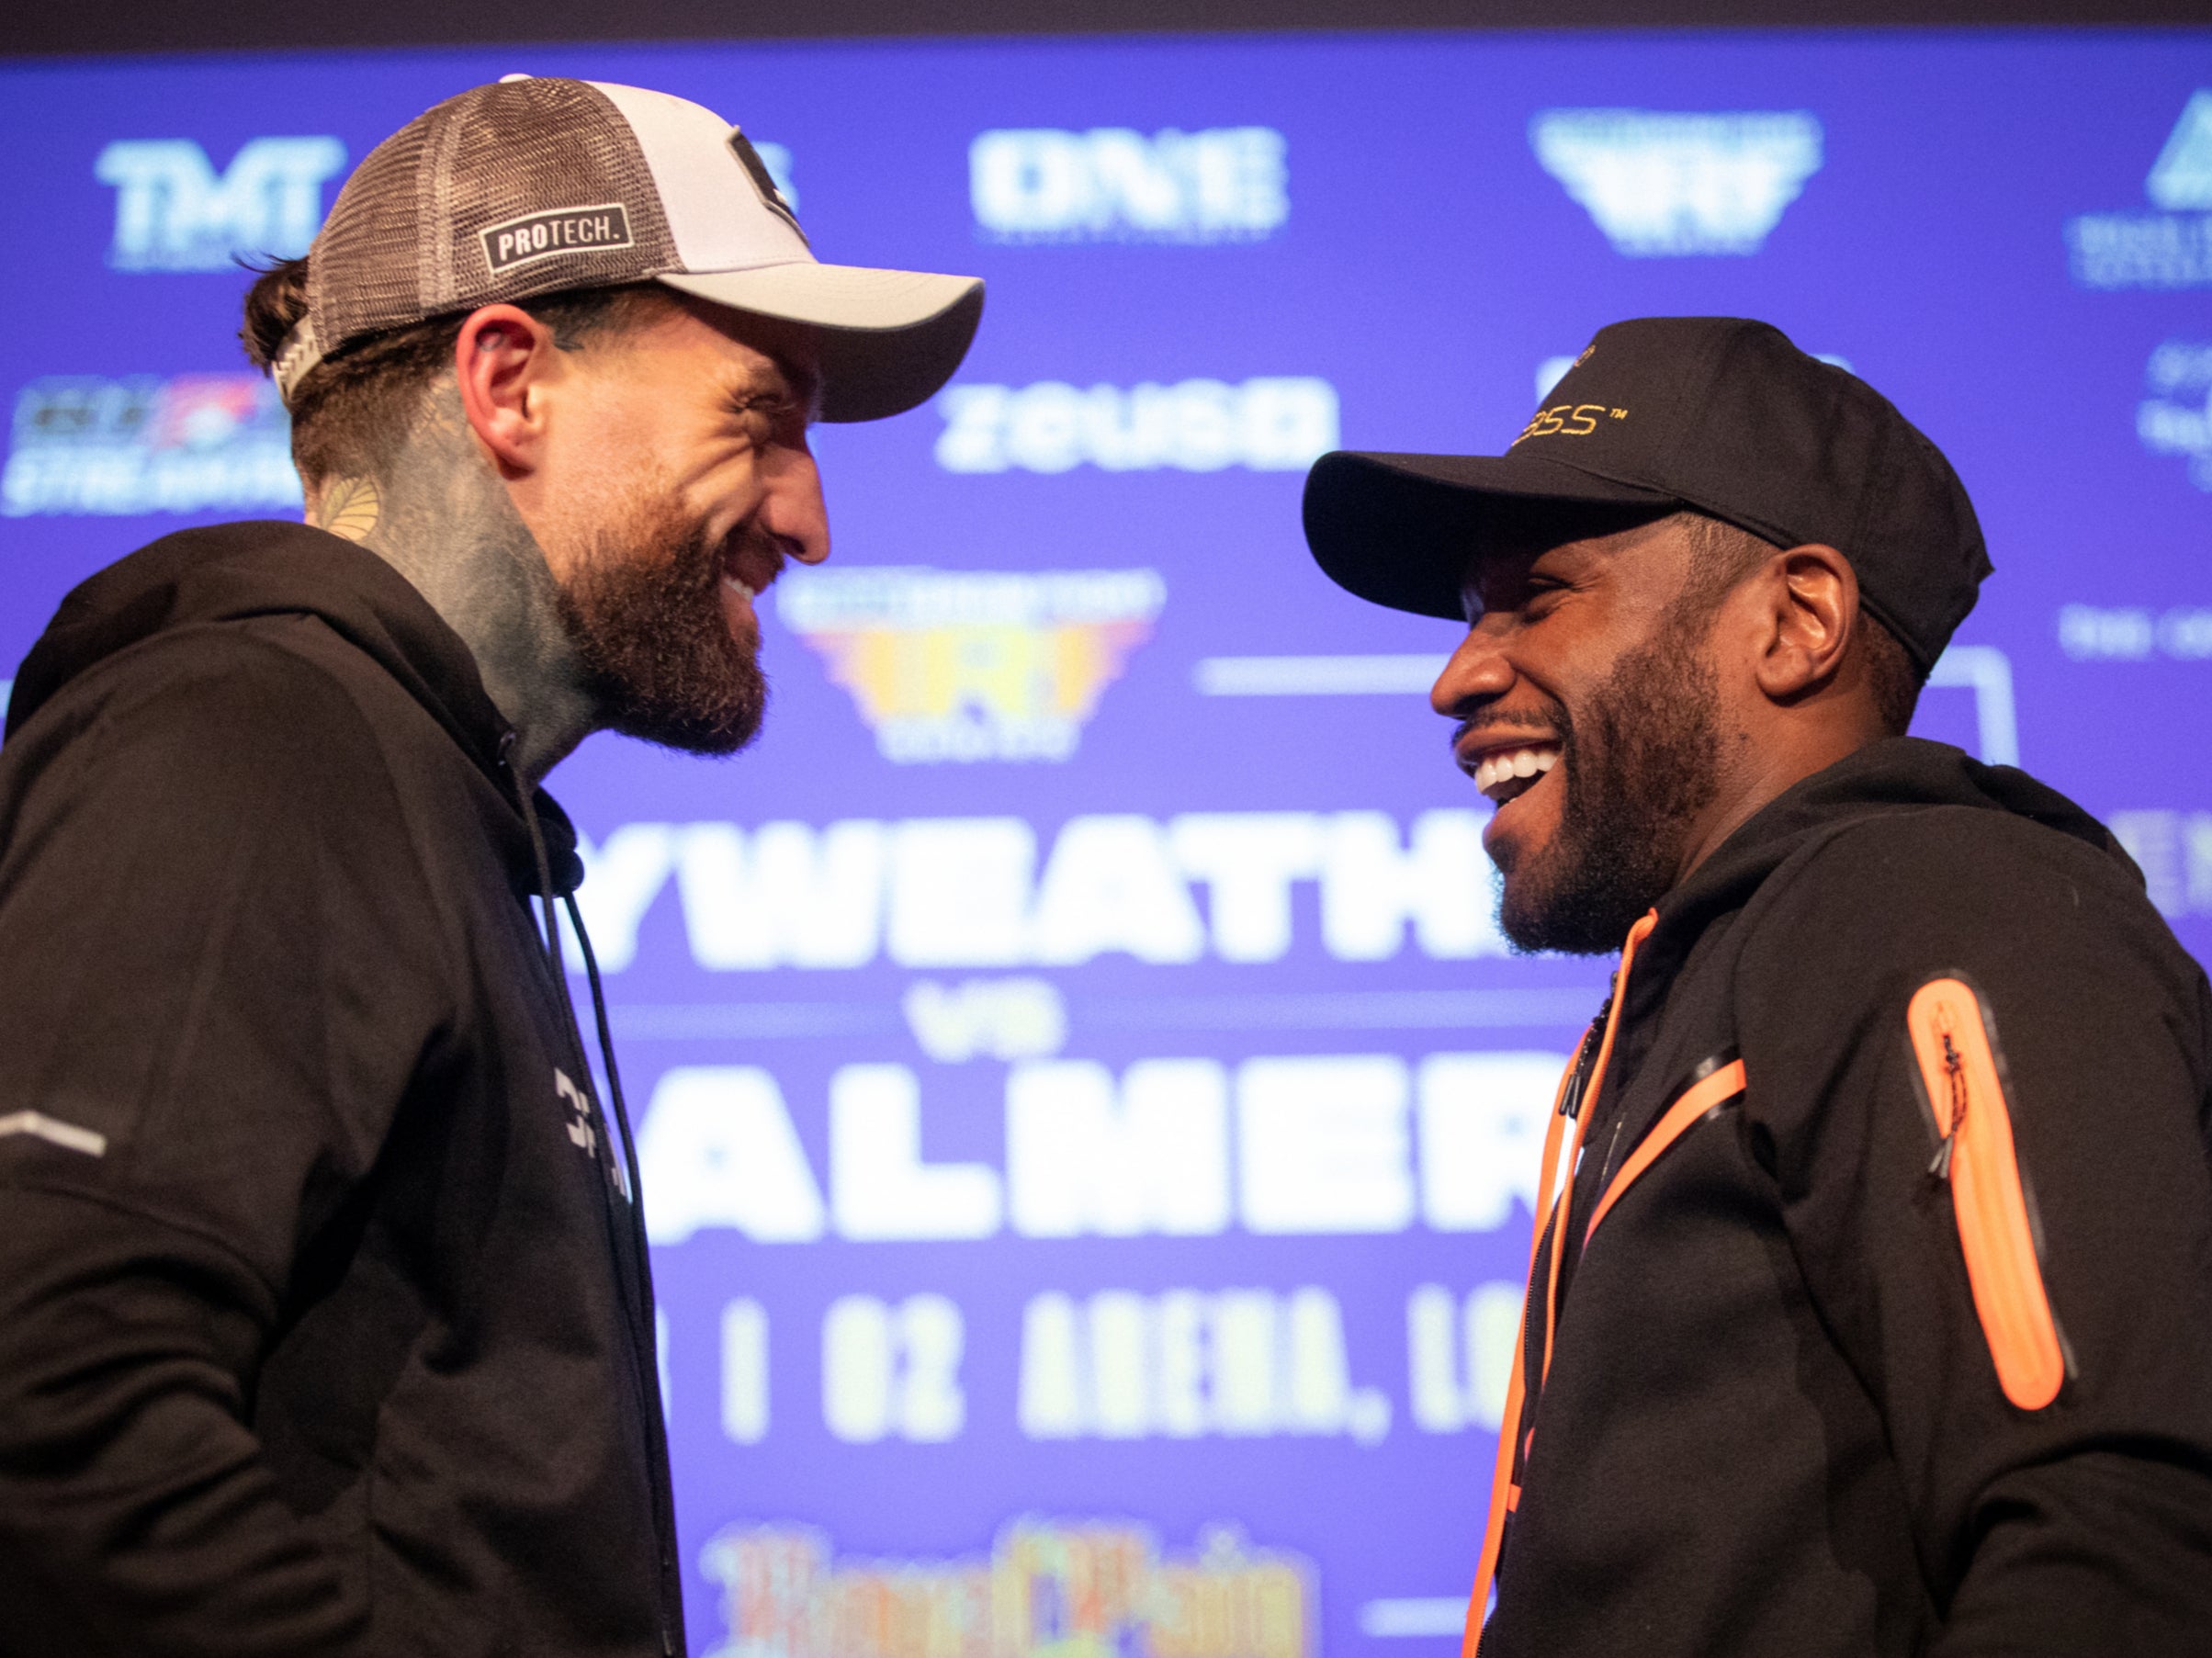 Aaron Chalmers (left) will box Floyd Mayweather in an exhibition bout at the O2 Arena